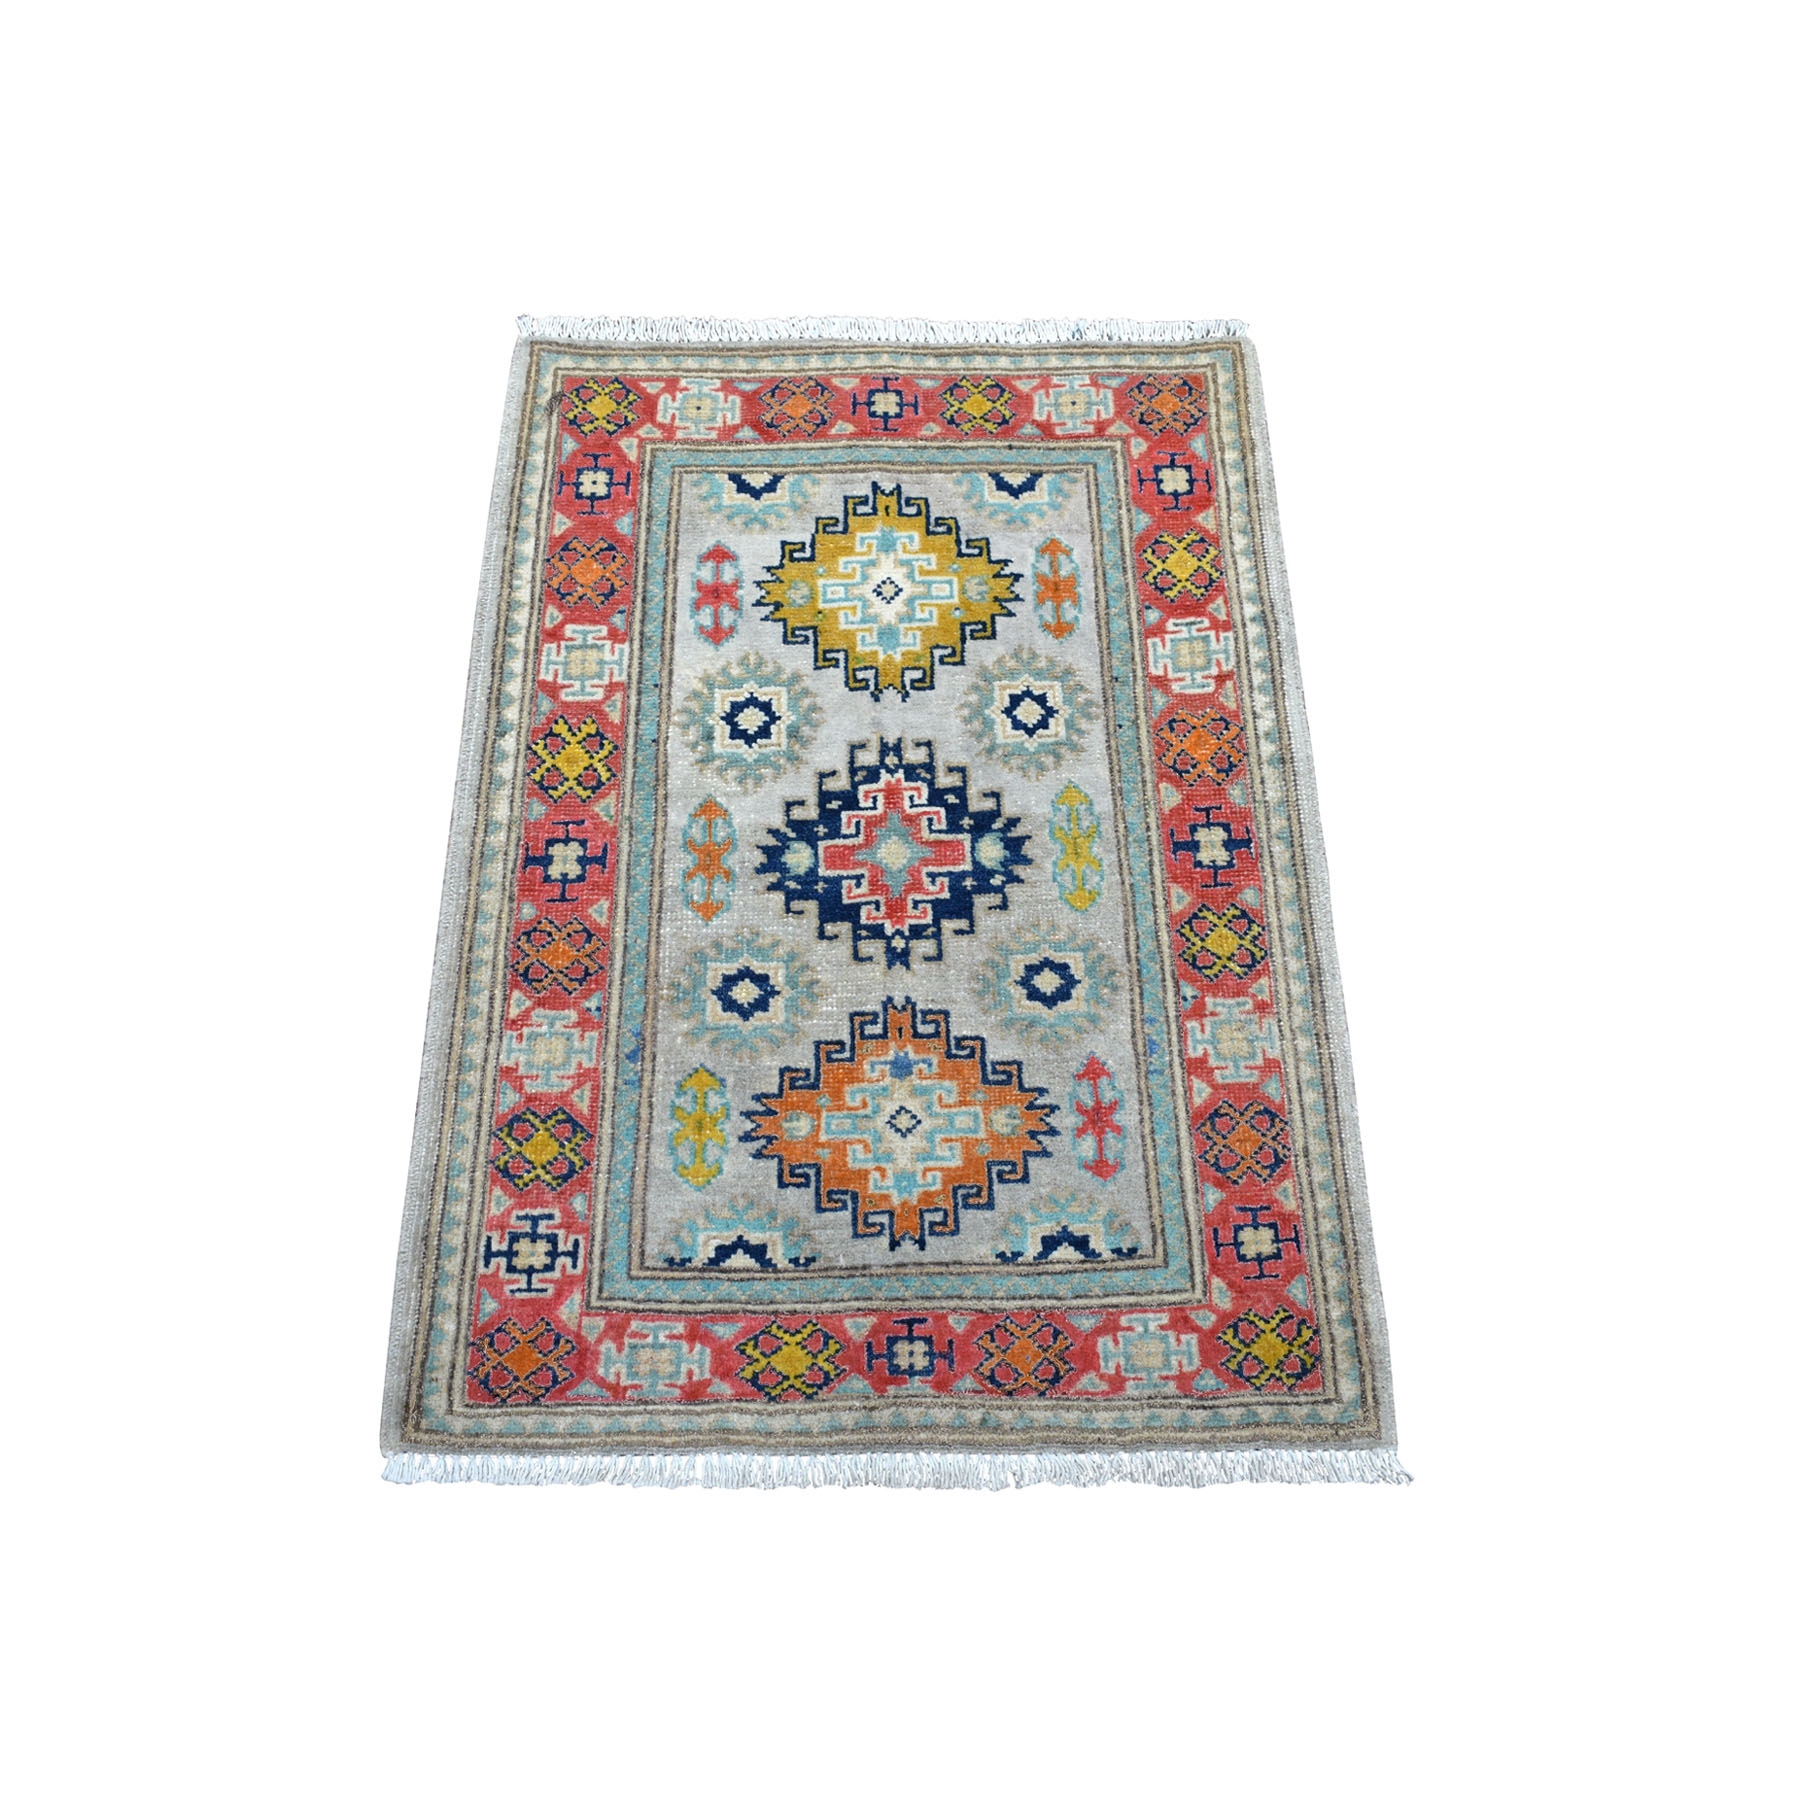 2'X2'9" Colorful Ivory Fusion Kazak Pure Wool Hand Knotted Oriental Rug moaedca8